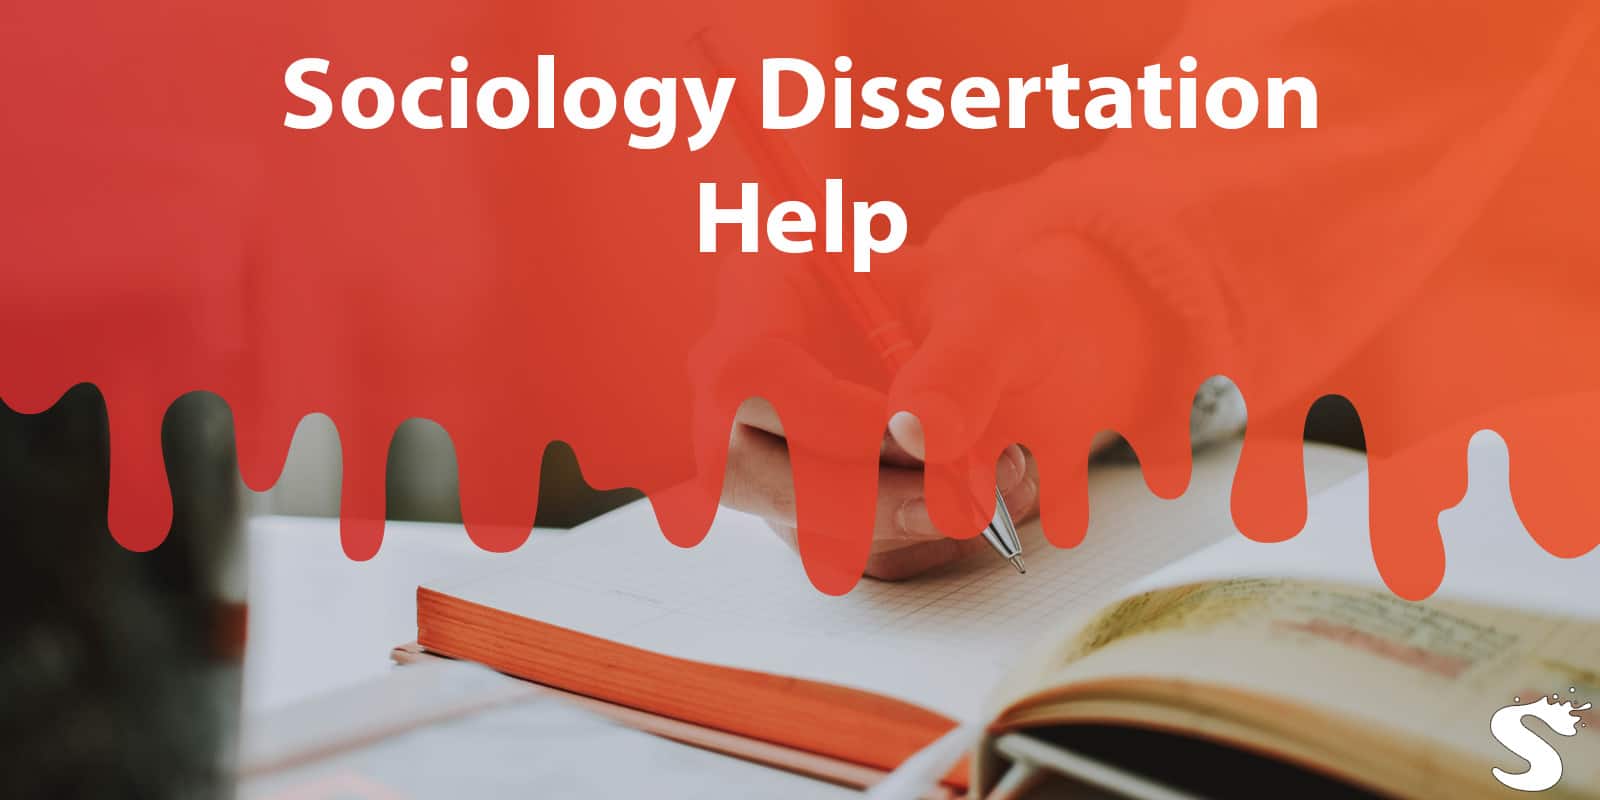 Sociology Dissertation Help: A Comprehensive Guide to Crafting an Outstanding Paper